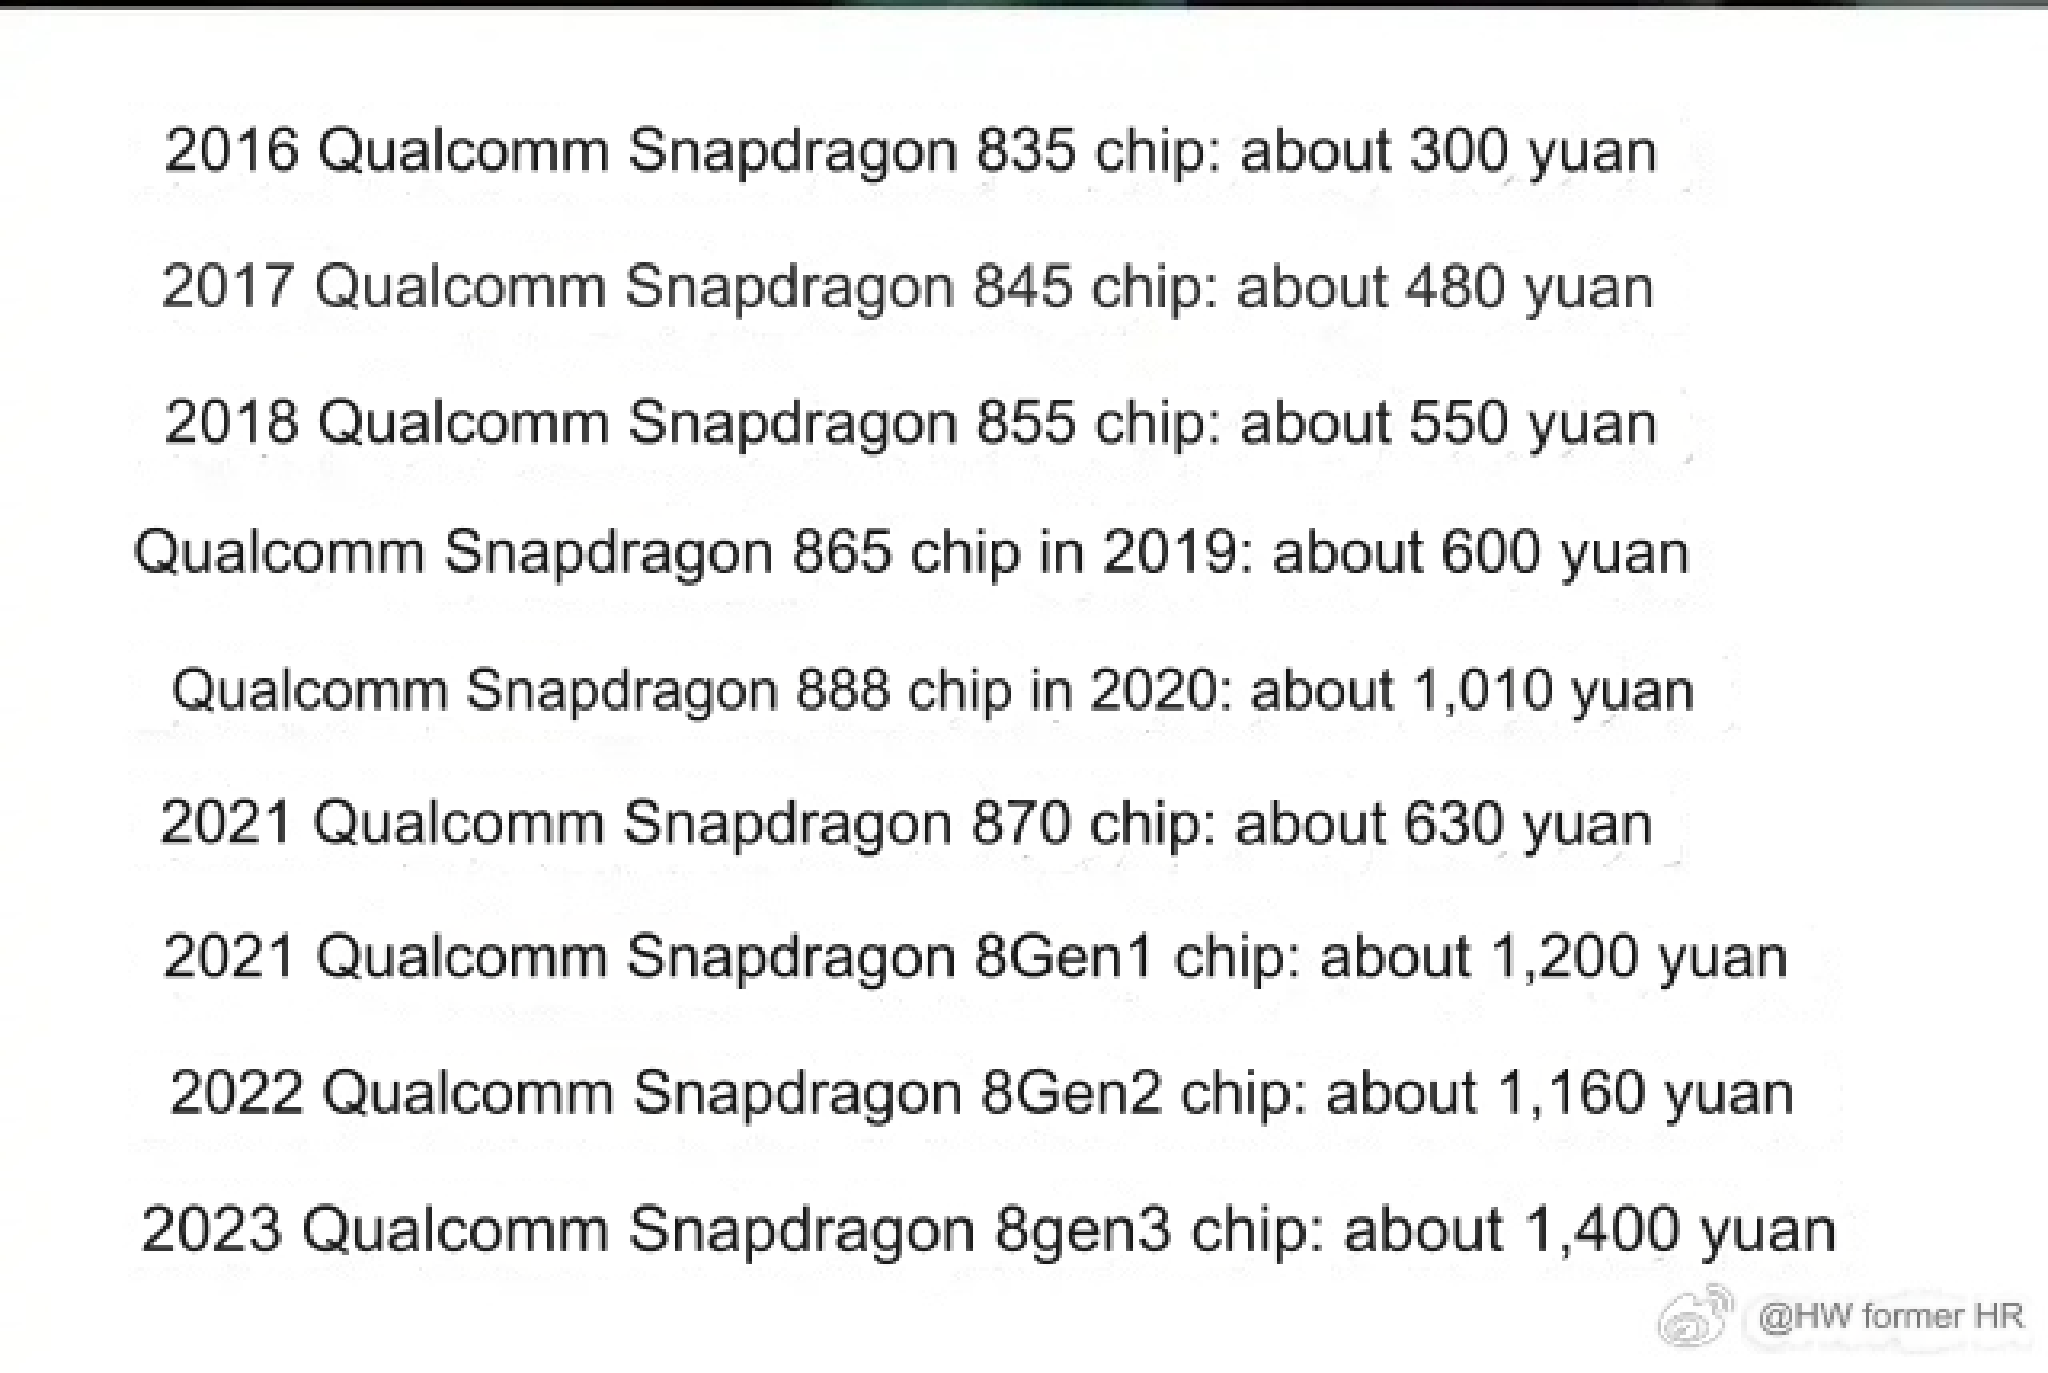 gia-cac-chip-snapdragon-theo-tung-nam-tinh-den-2023.png